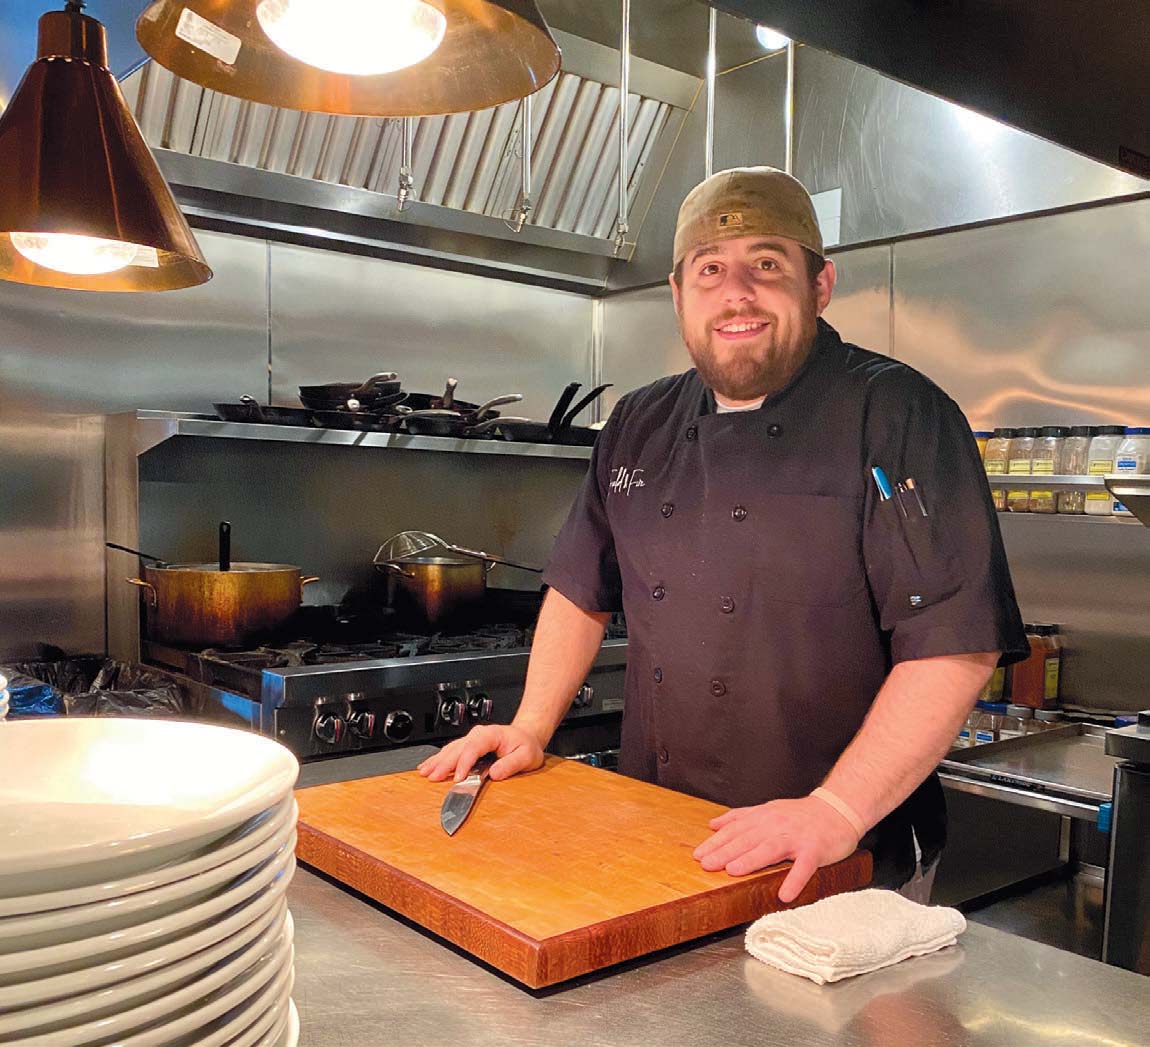 Ryan Sherman in the Field & Fire kitchen. His decision to switch from a career as a research scientist into the culinary arts landed him some national recognition after winning Food Networks’ Cutthroat Kitchen. Photo by Leslie Gast